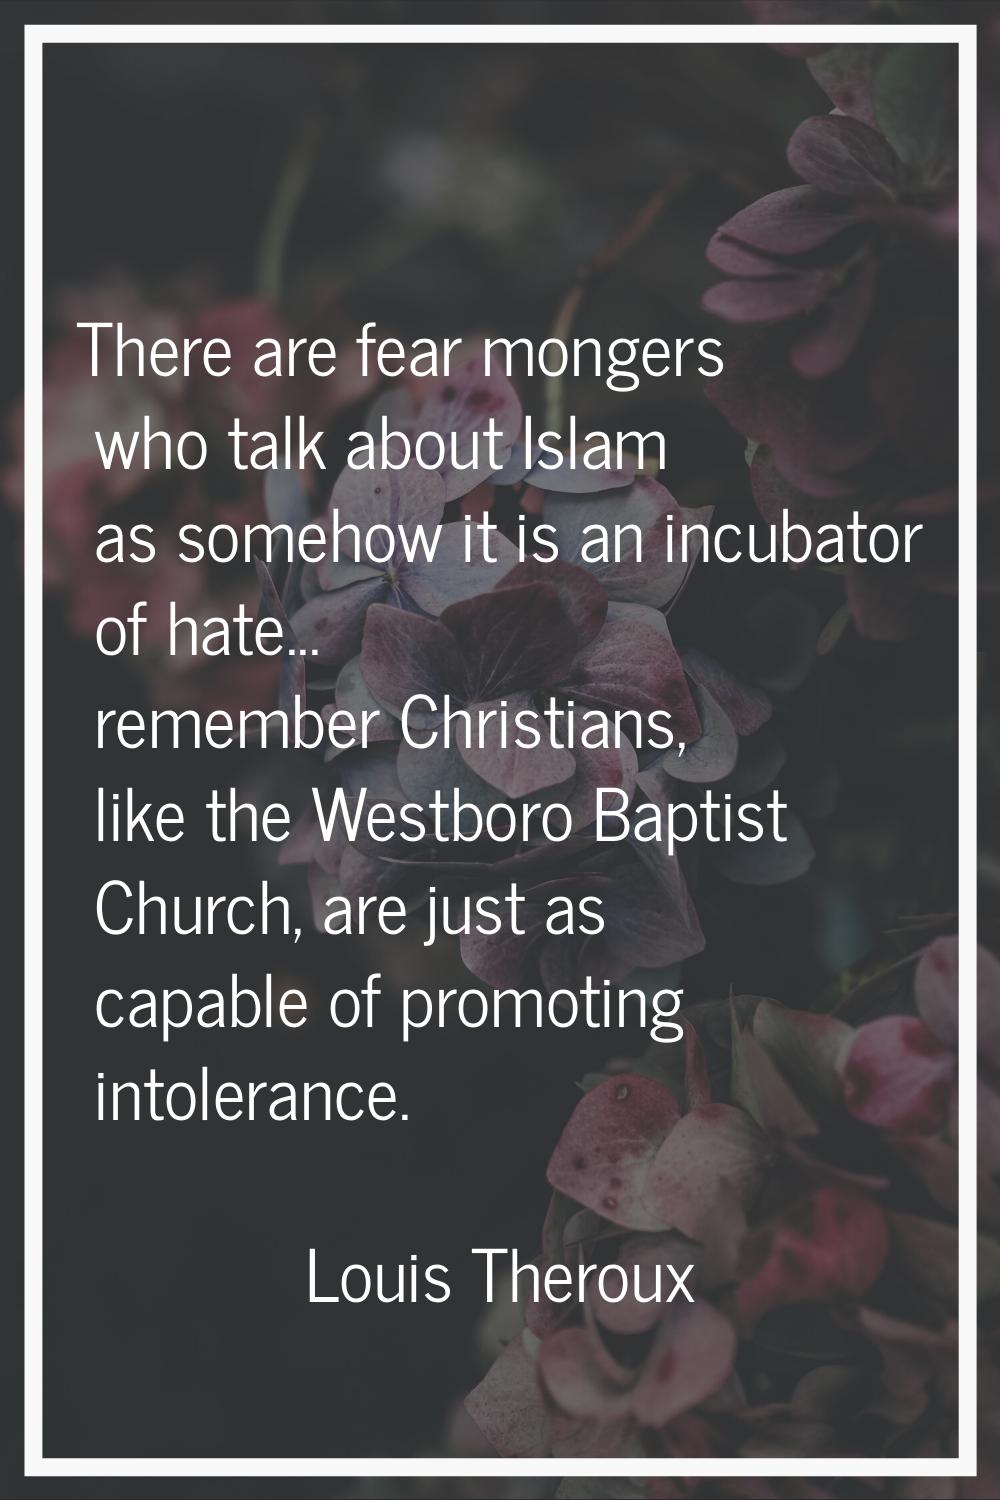 There are fear mongers who talk about Islam as somehow it is an incubator of hate... remember Chris